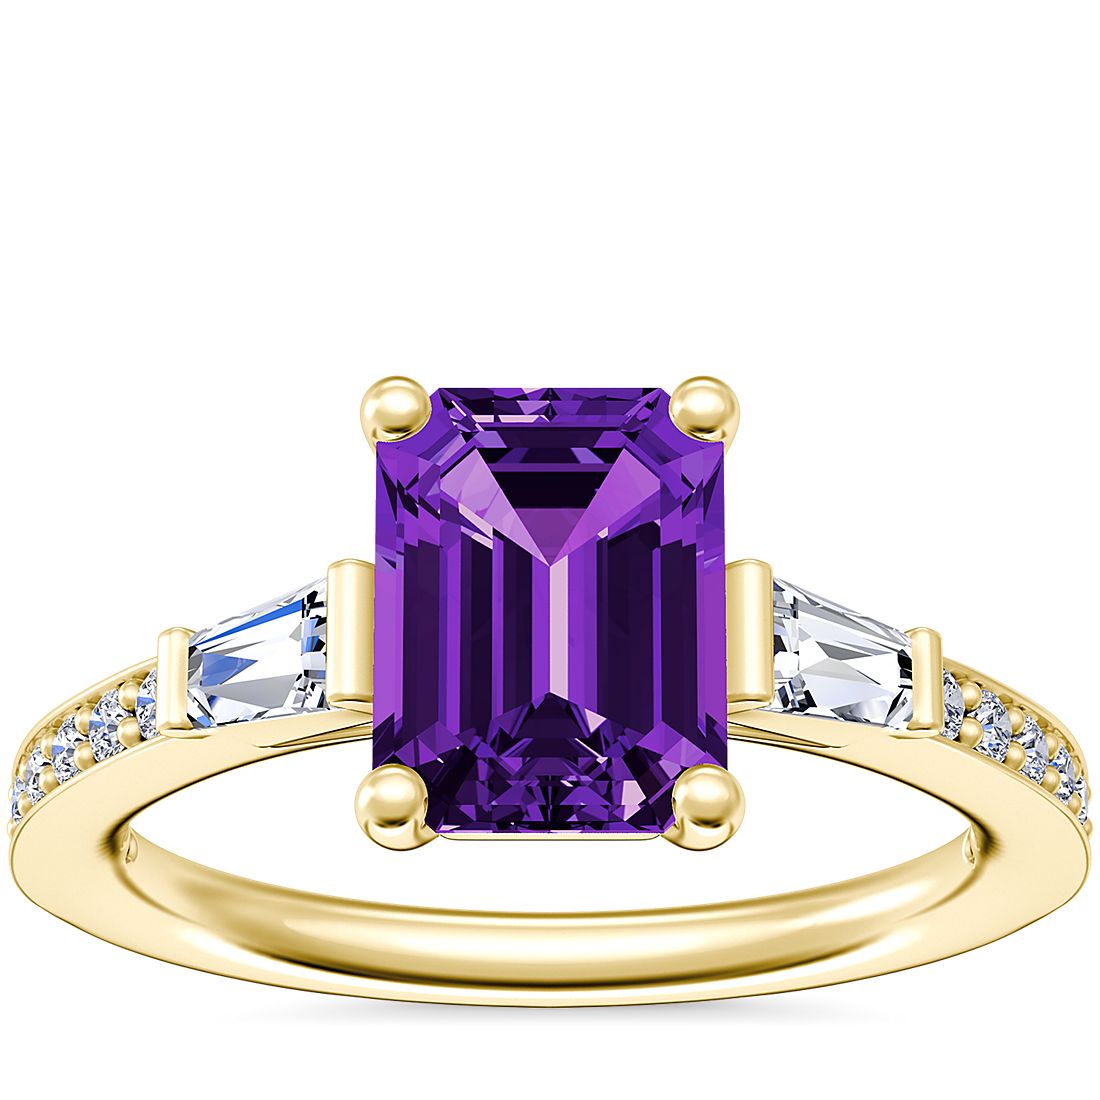 Tapered Baguette Diamond Cathedral Engagement Ring with Emerald-Cut Amethyst in 14k Yellow Gold (8x6mm)